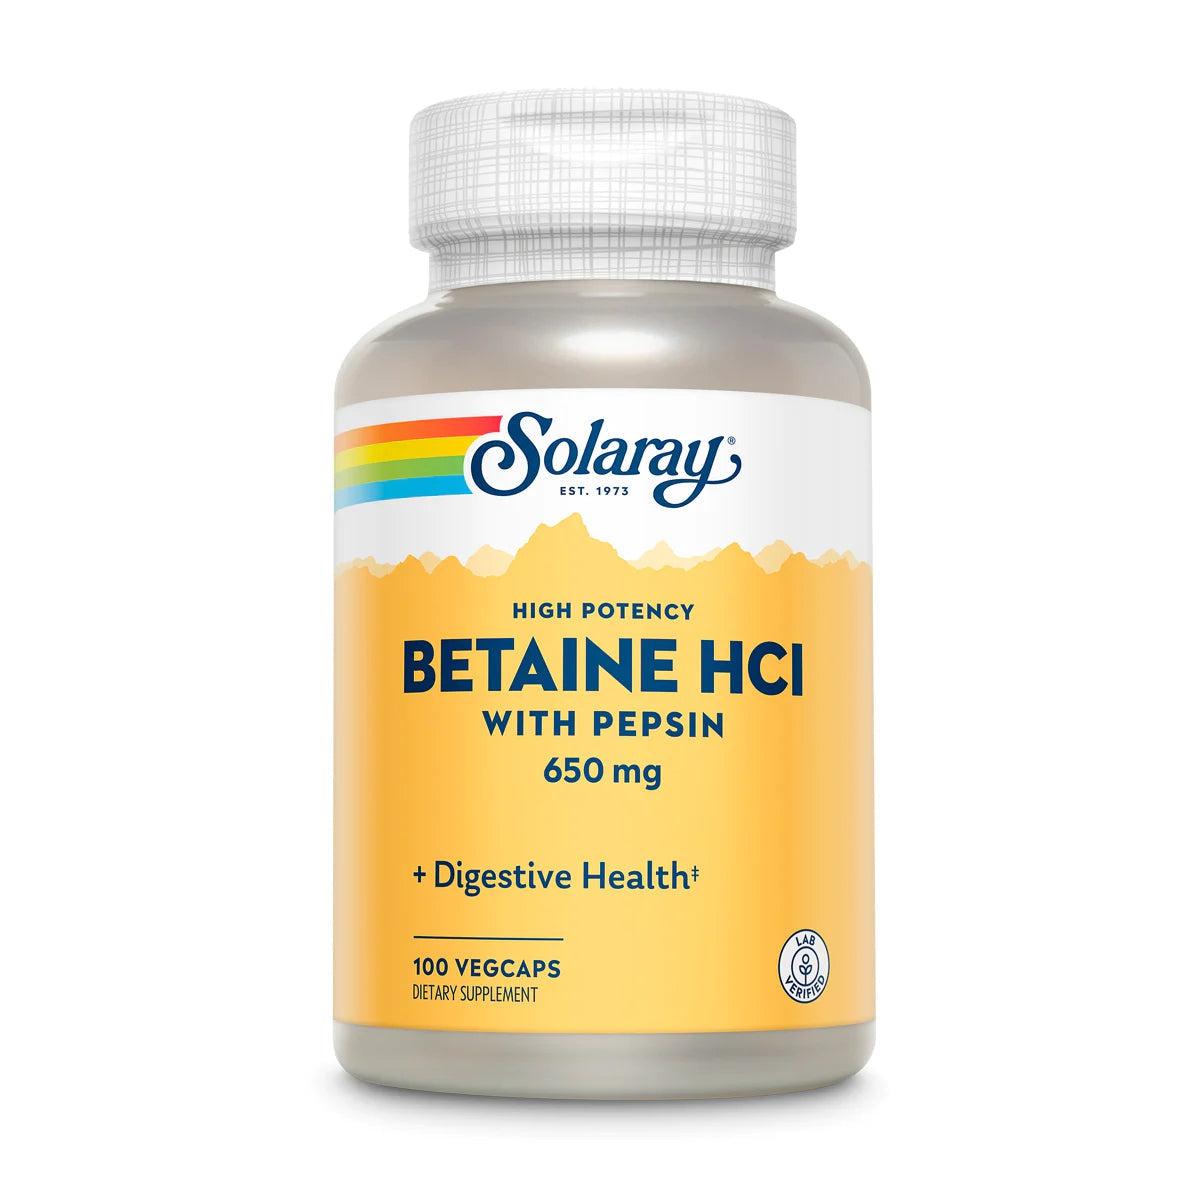 Solaray High Potency Betaine HCl with Pepsin 100 Veg Capsules